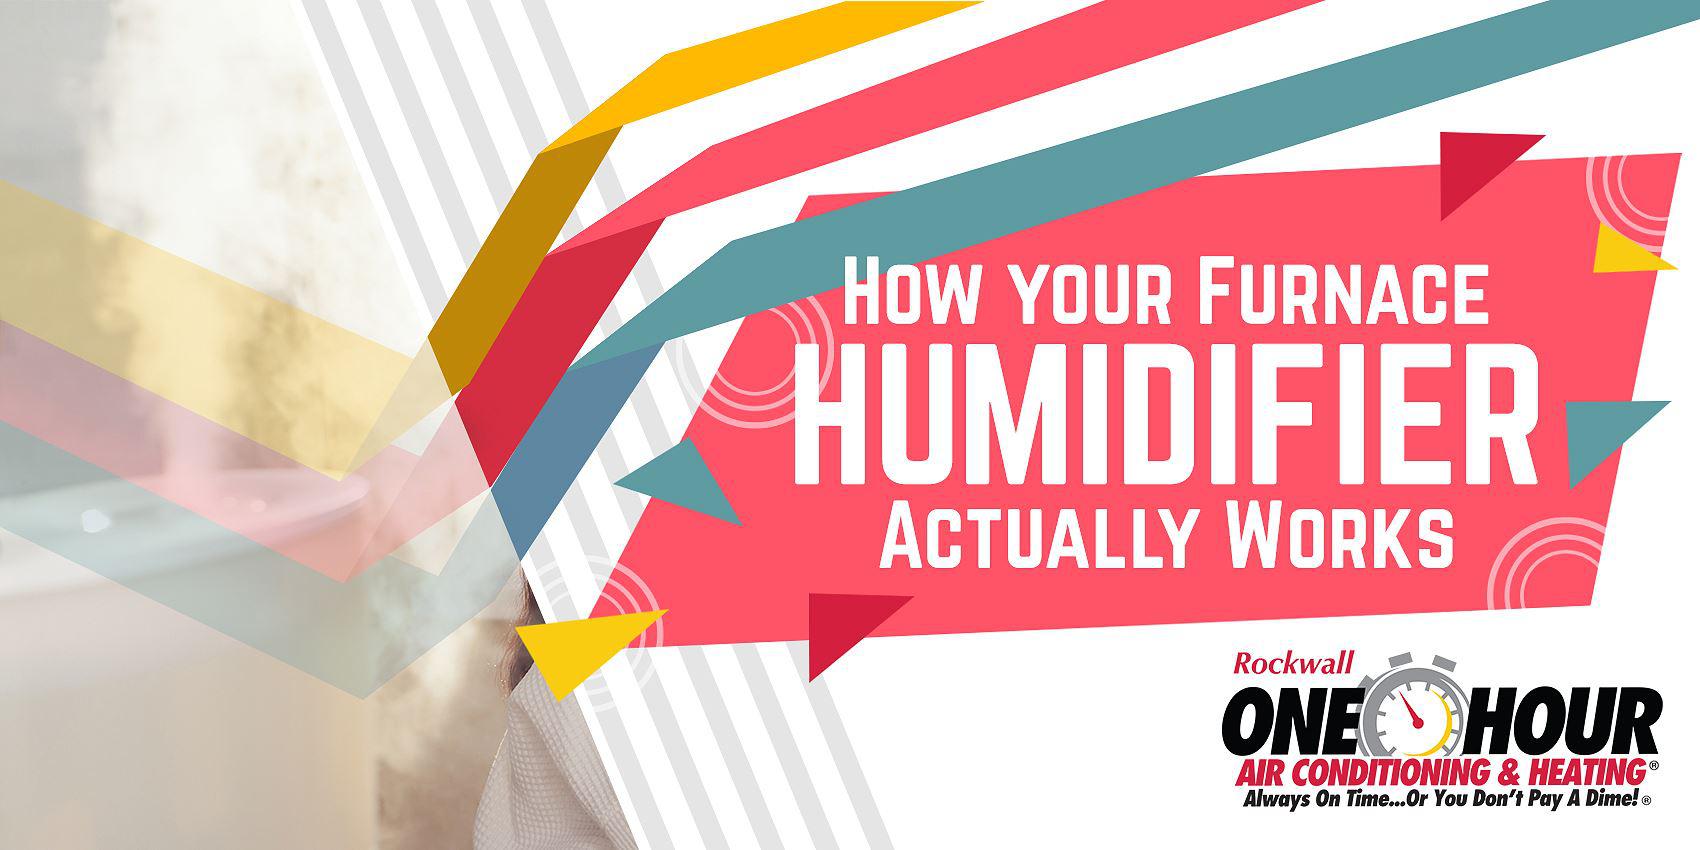 How Your Furnace Humidifier Actually Works (and Why You Should Have One)